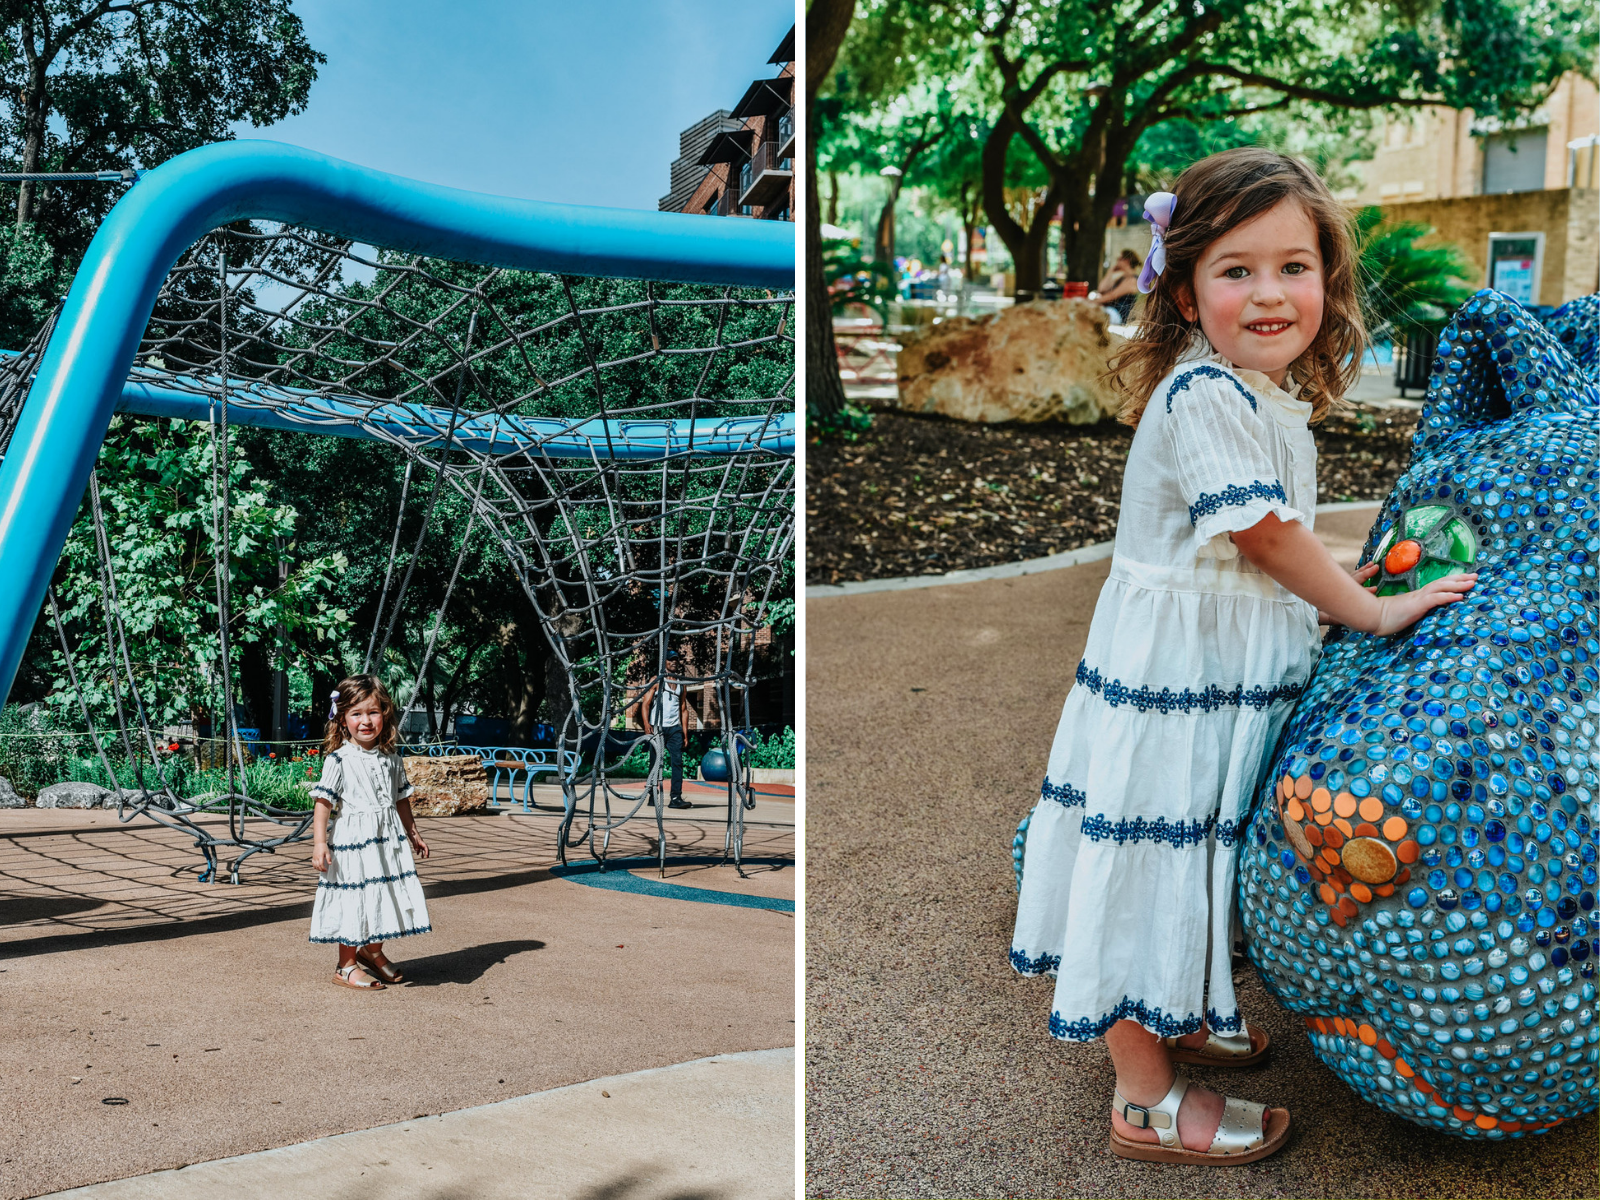 Top 10 Kid Friendly Activities in San Antonio by popular Texas travel blog, Lone Star Looking Glass: image of a little girl playing at the Yanaguana Garden playground.